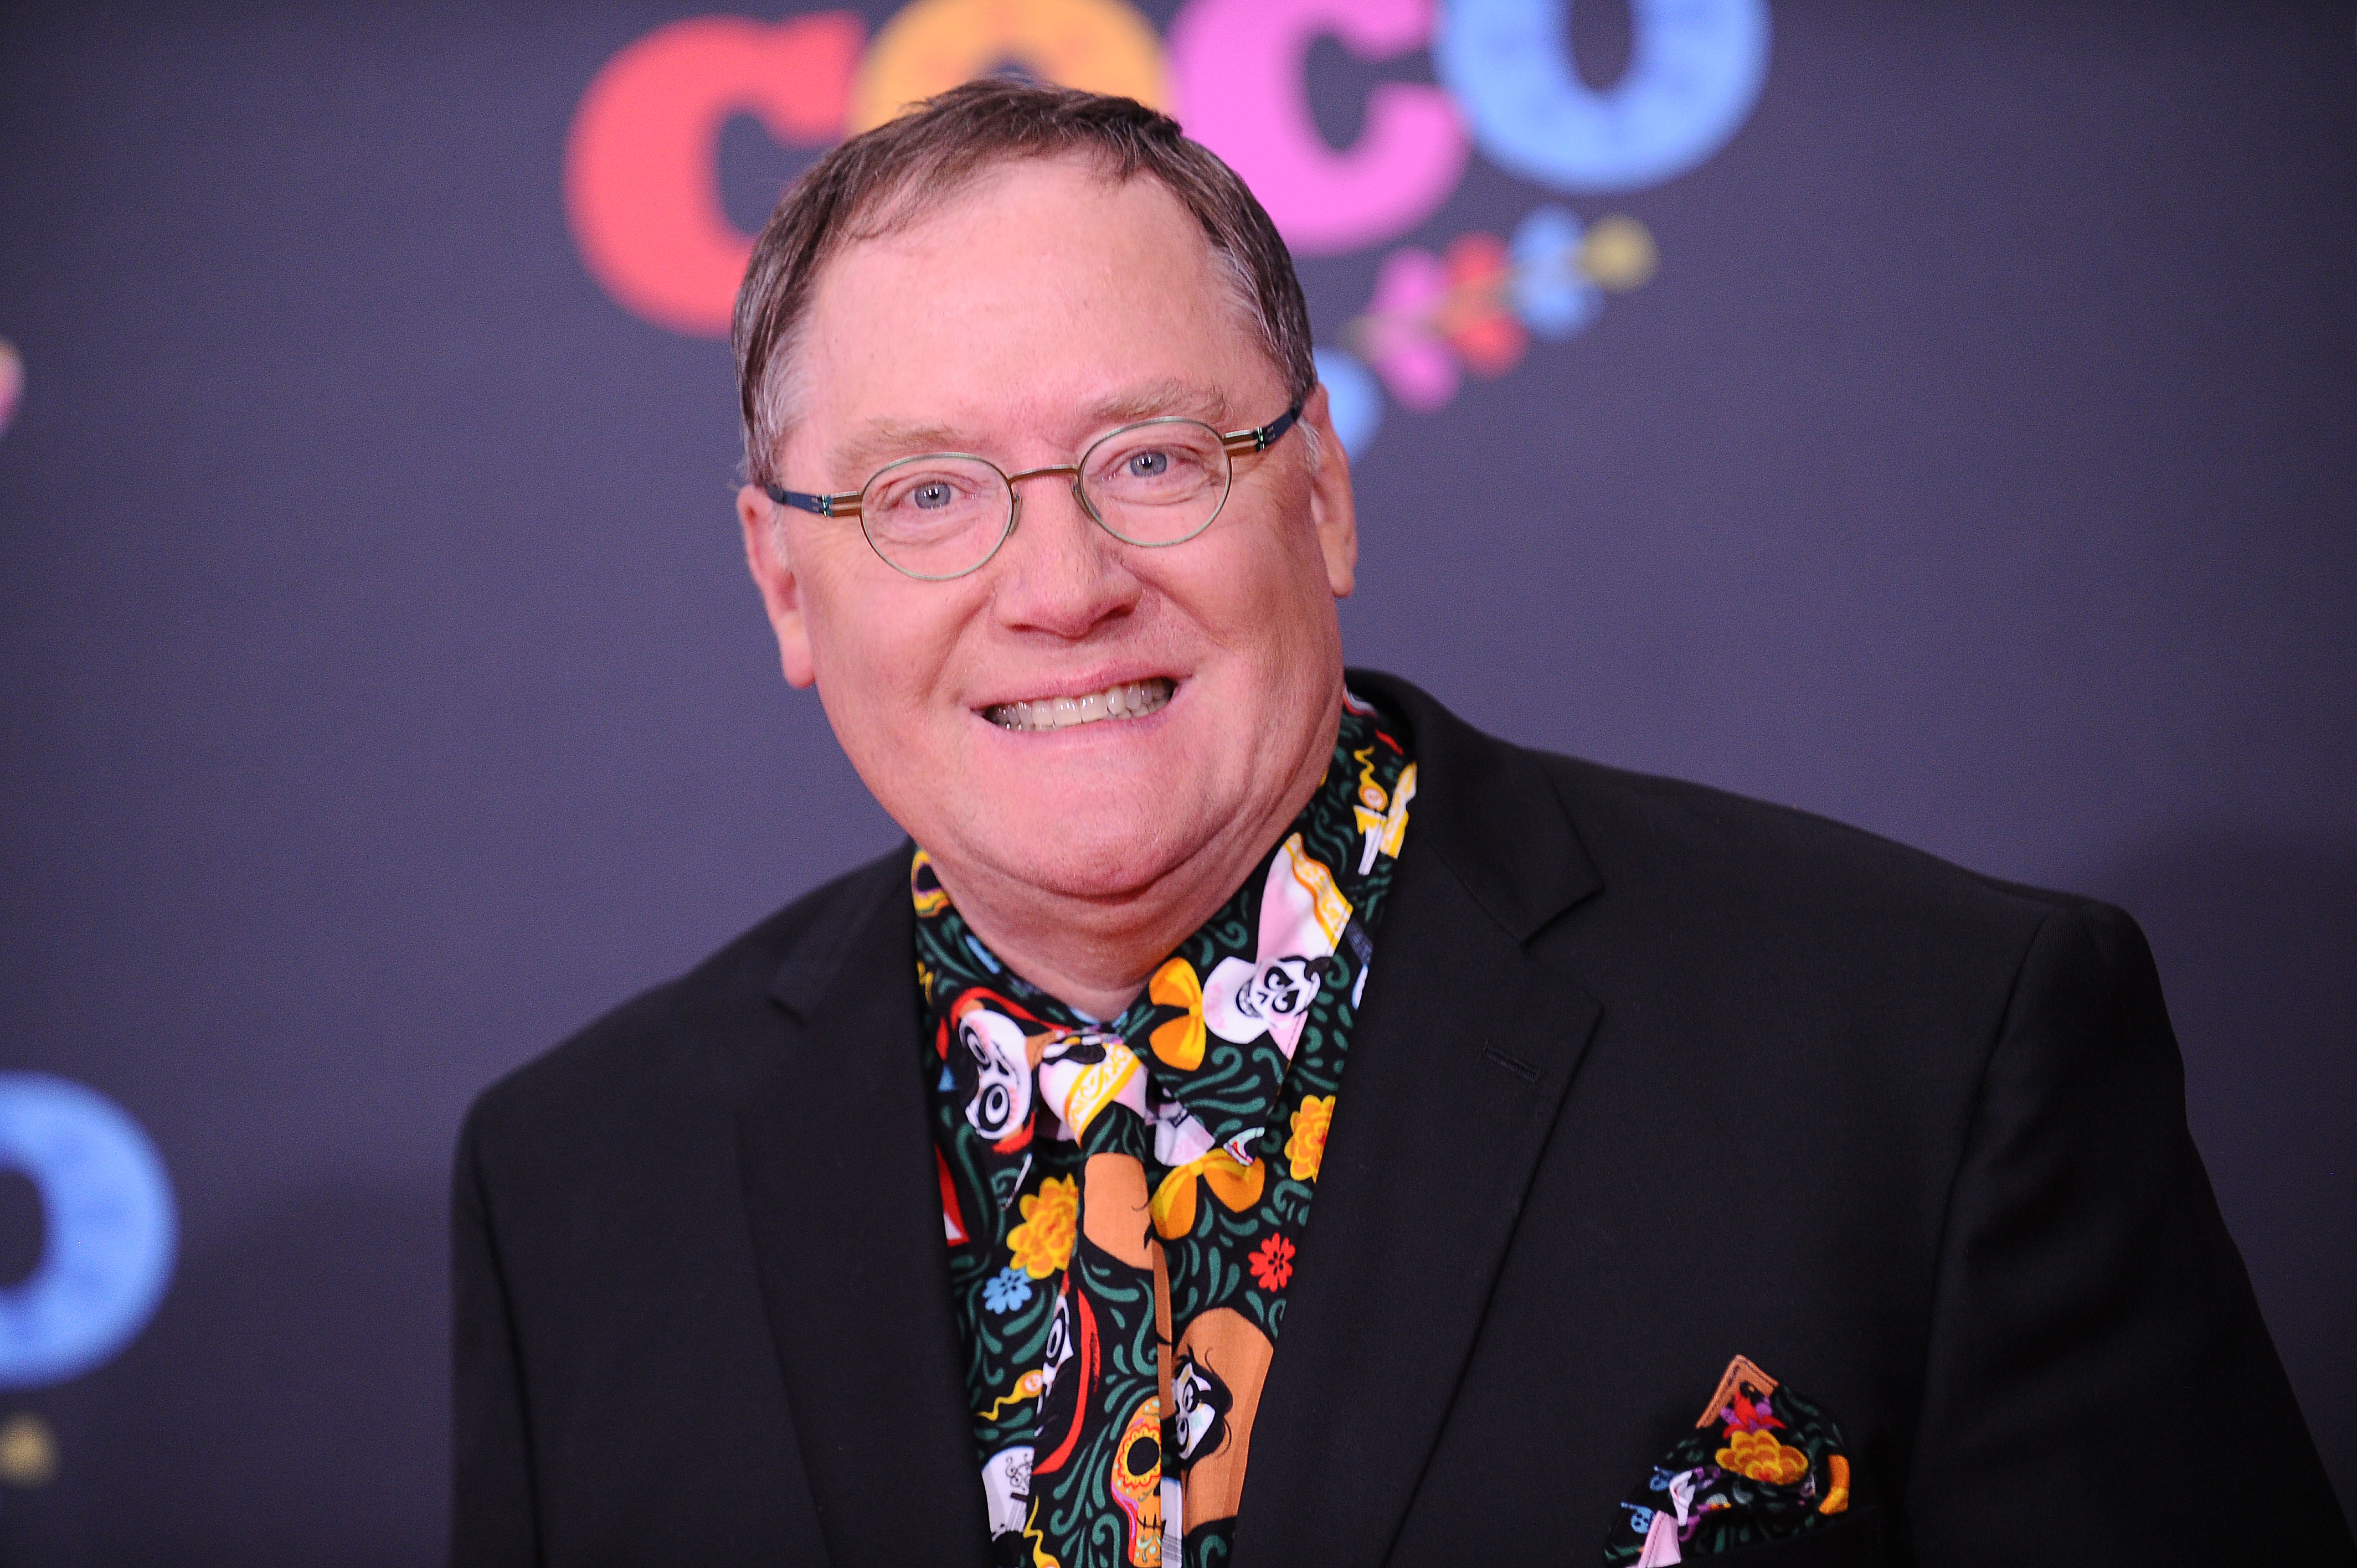 John Lasseter attends the premiere of 